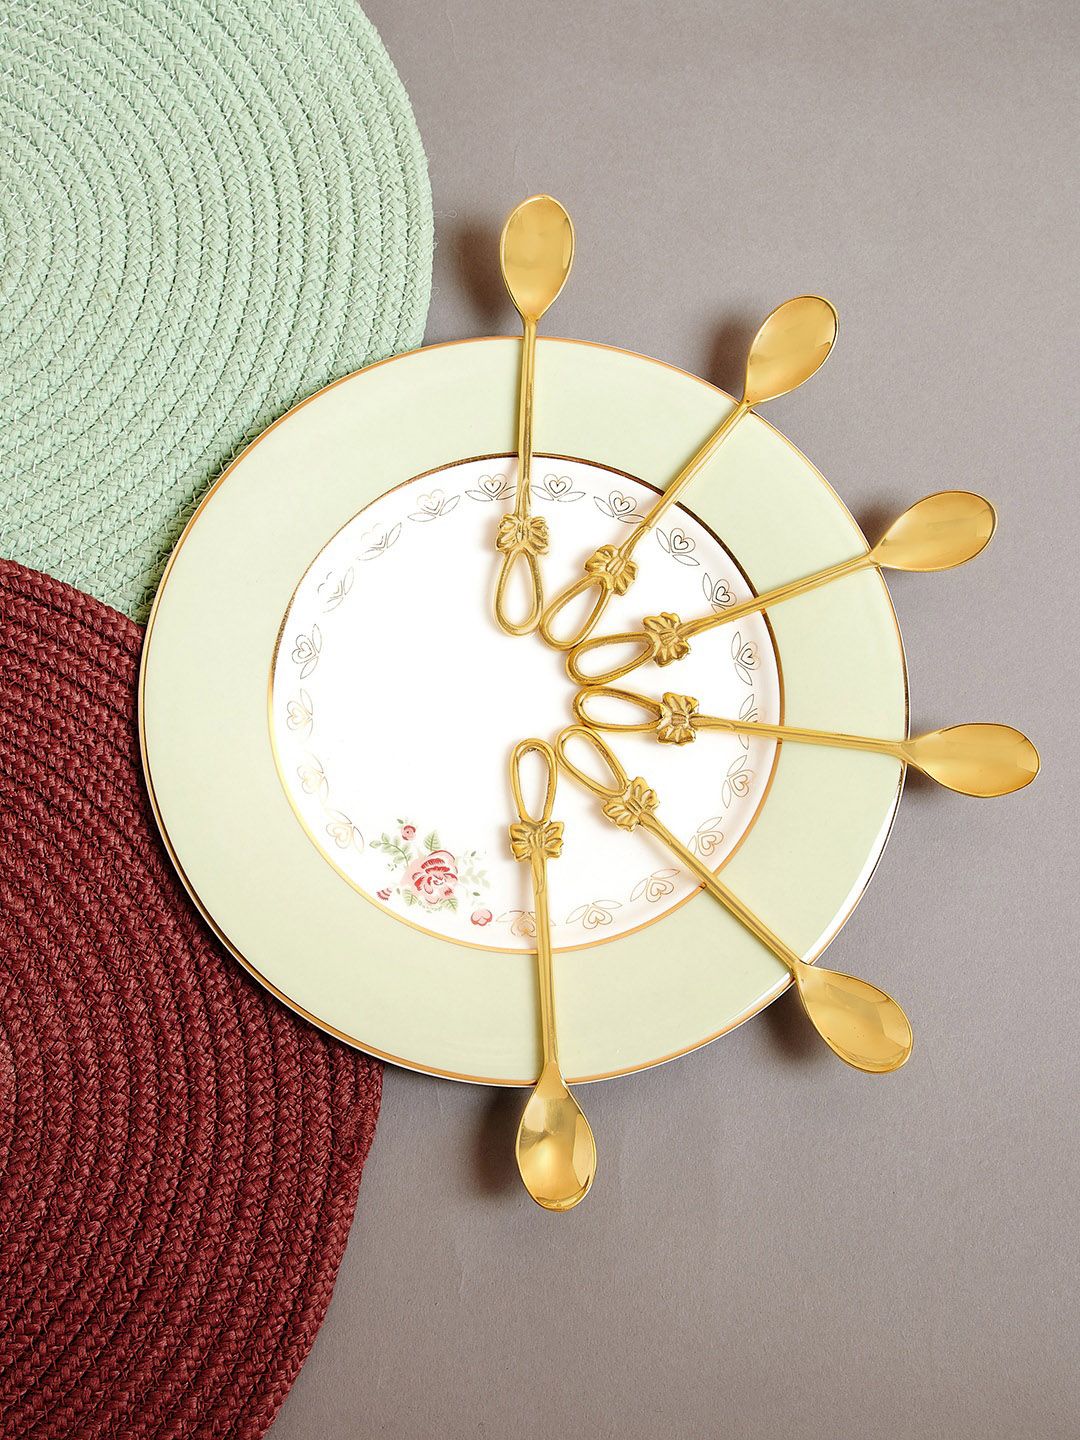 The Wishing Chair Gold-Toned 6-Pieces Bow me up Spoon Set Price in India